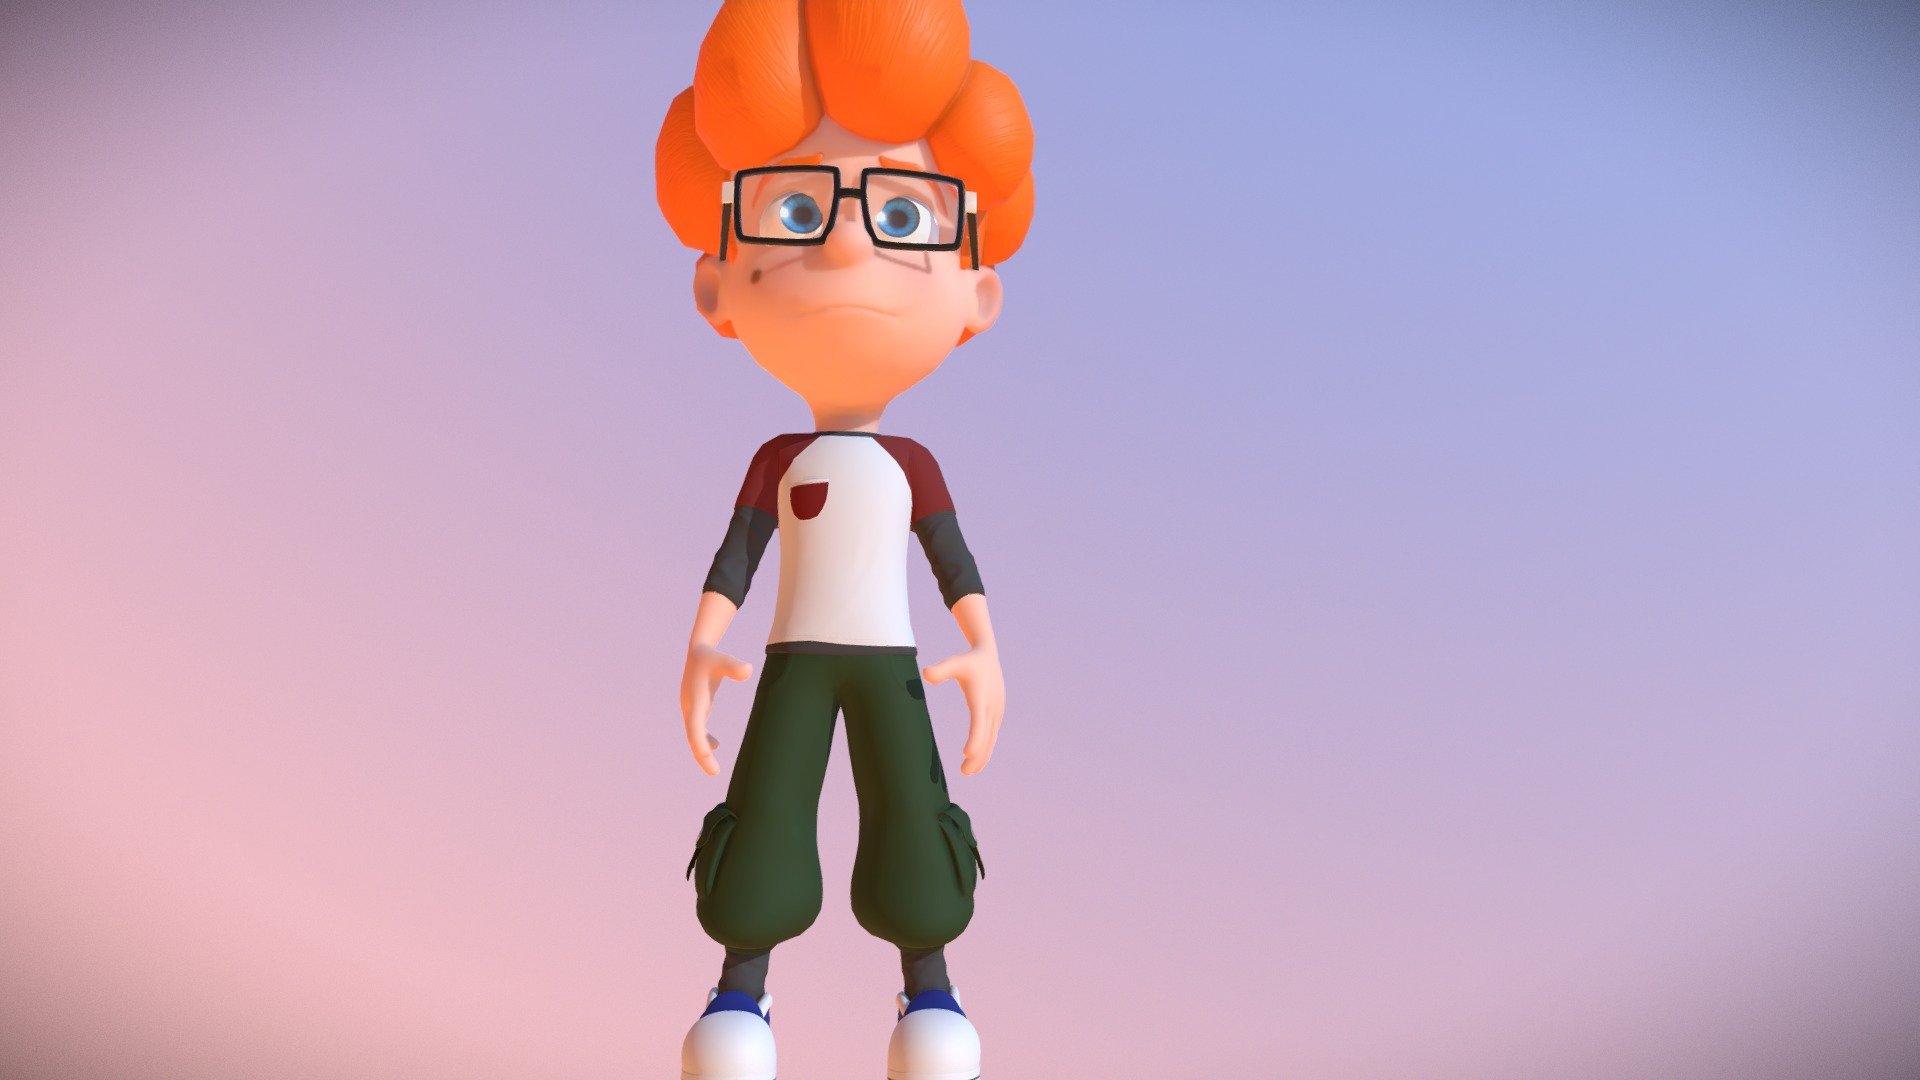 Howard is a young boy who is afraid of most things, but puts on a brave face. With the help of a happy-go-lucky wisp named Wispy, he becomes one of the best Realm Guardians that the world has to offer, believe it or not 3d model